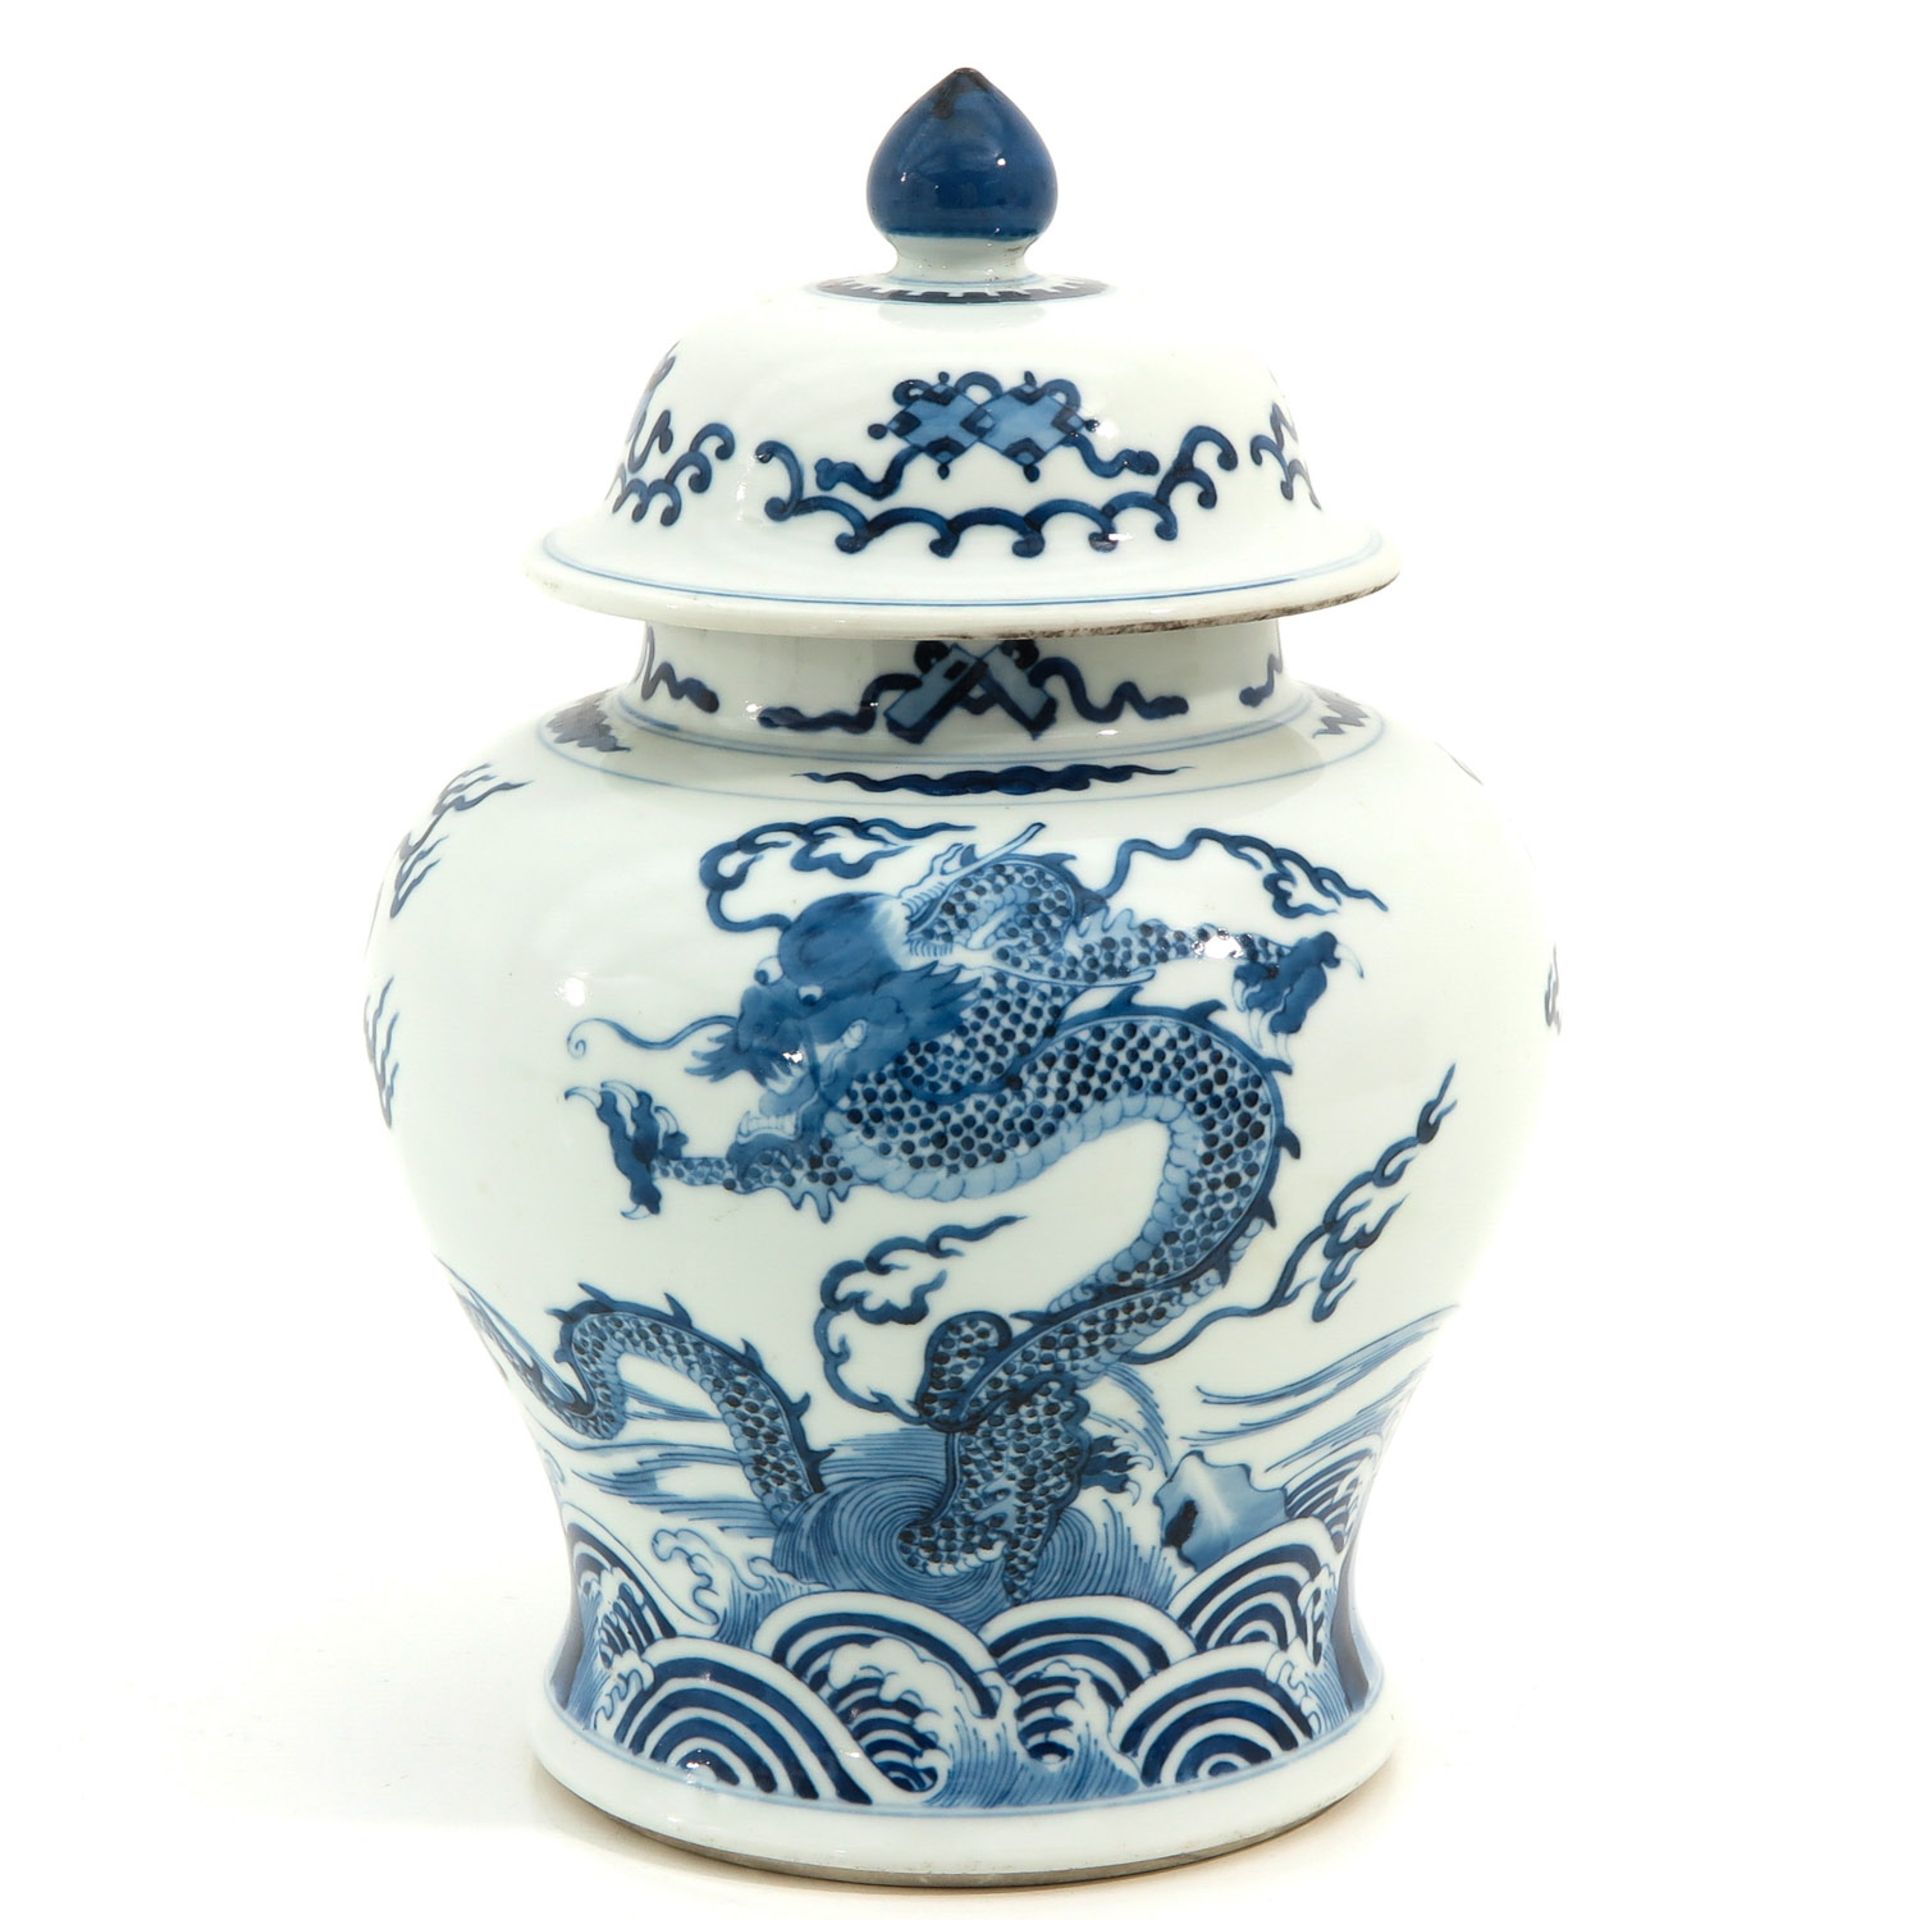 A Blue and White Vase with Cover